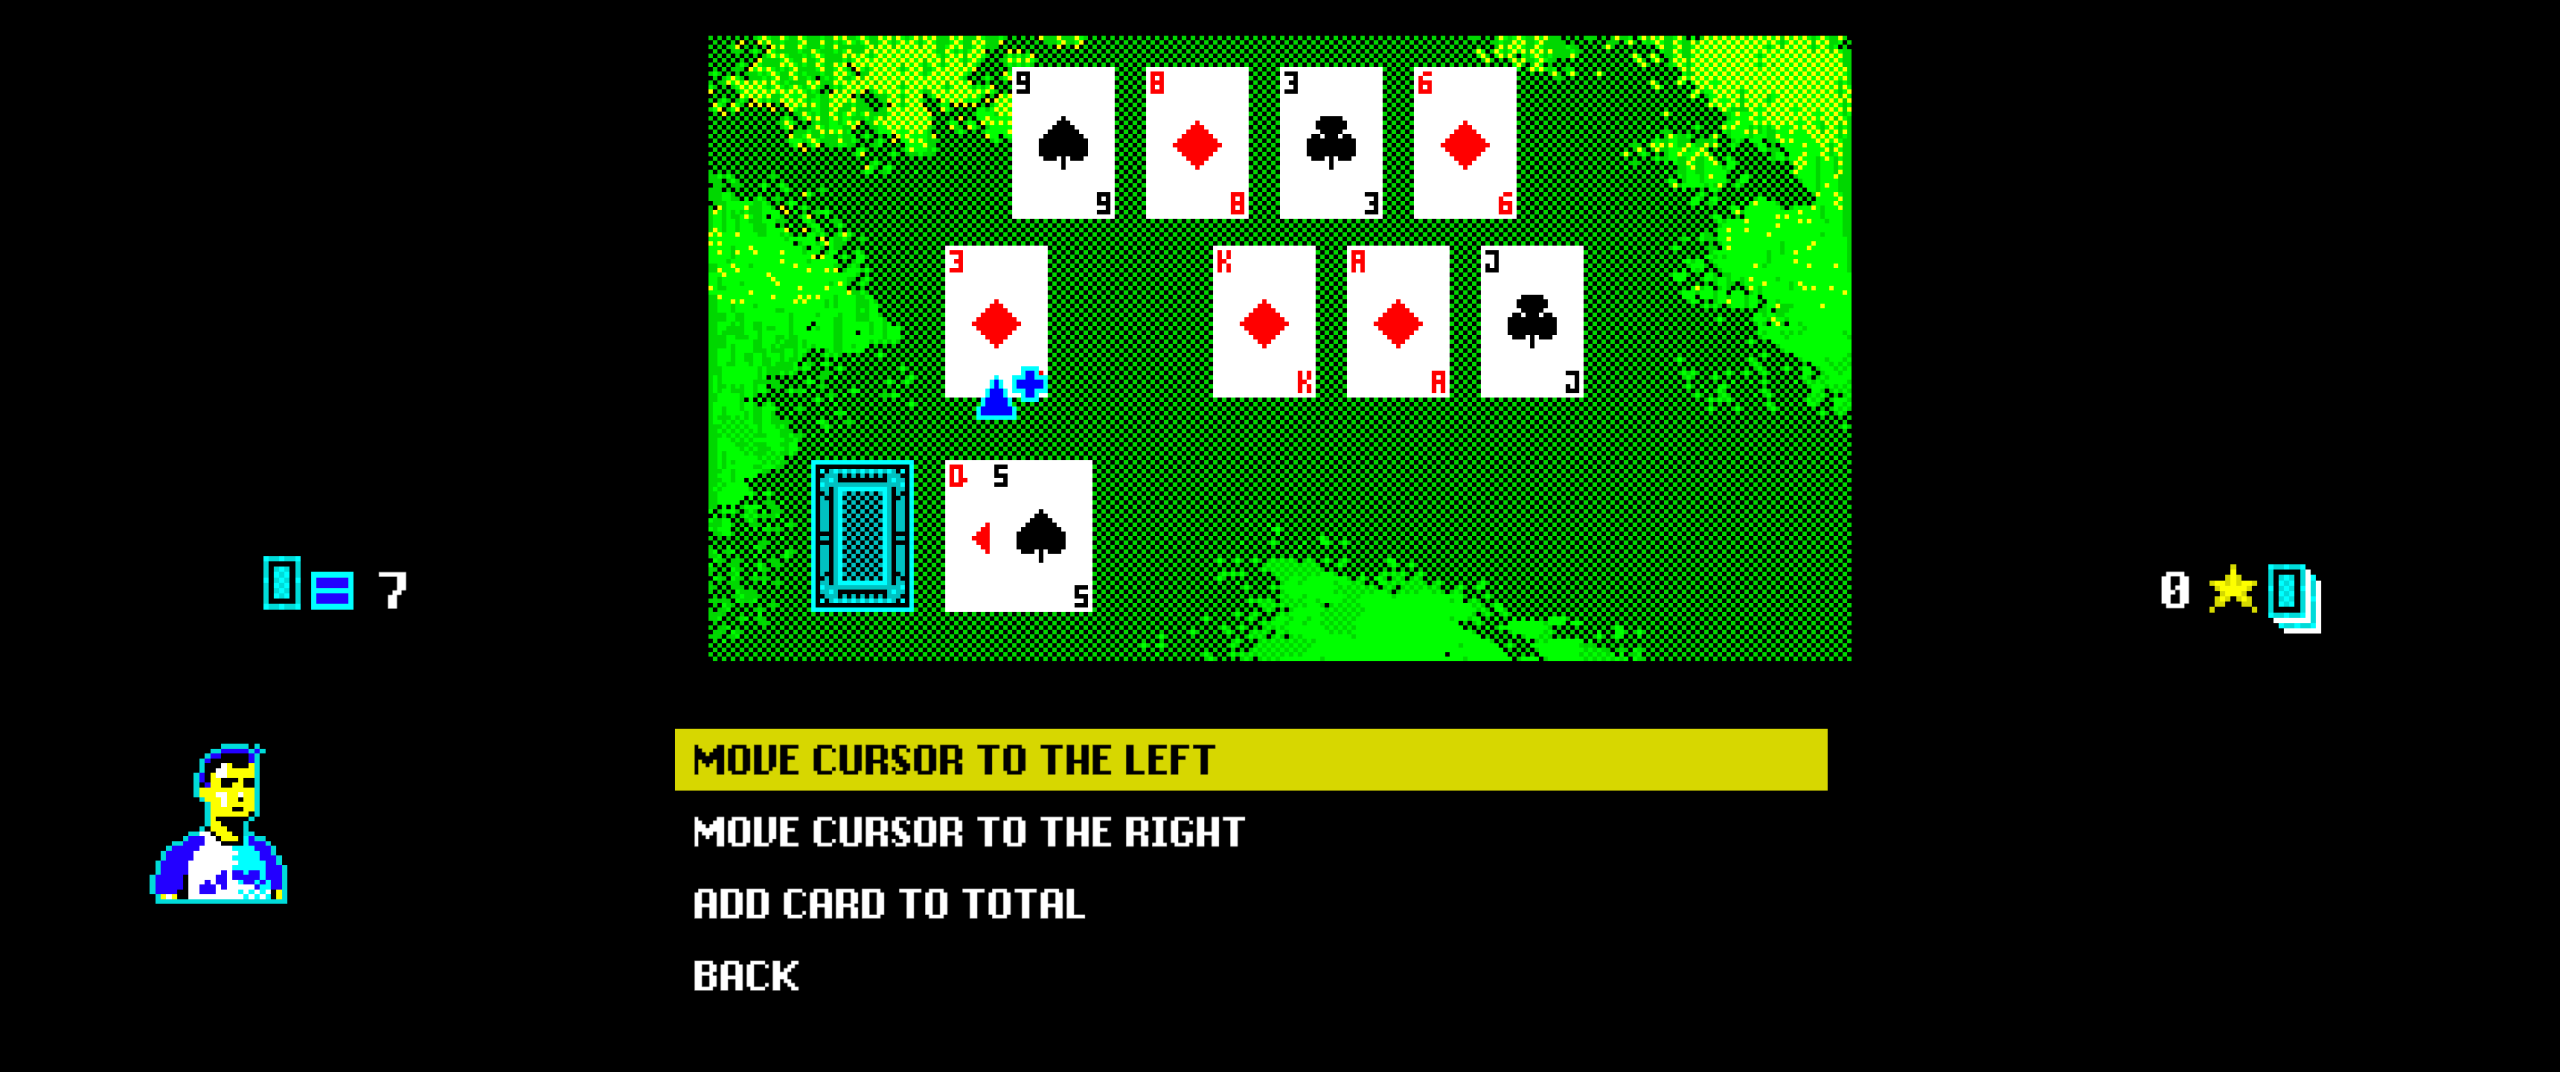 A screenshot from Varney Lake of Solitaire Ten.